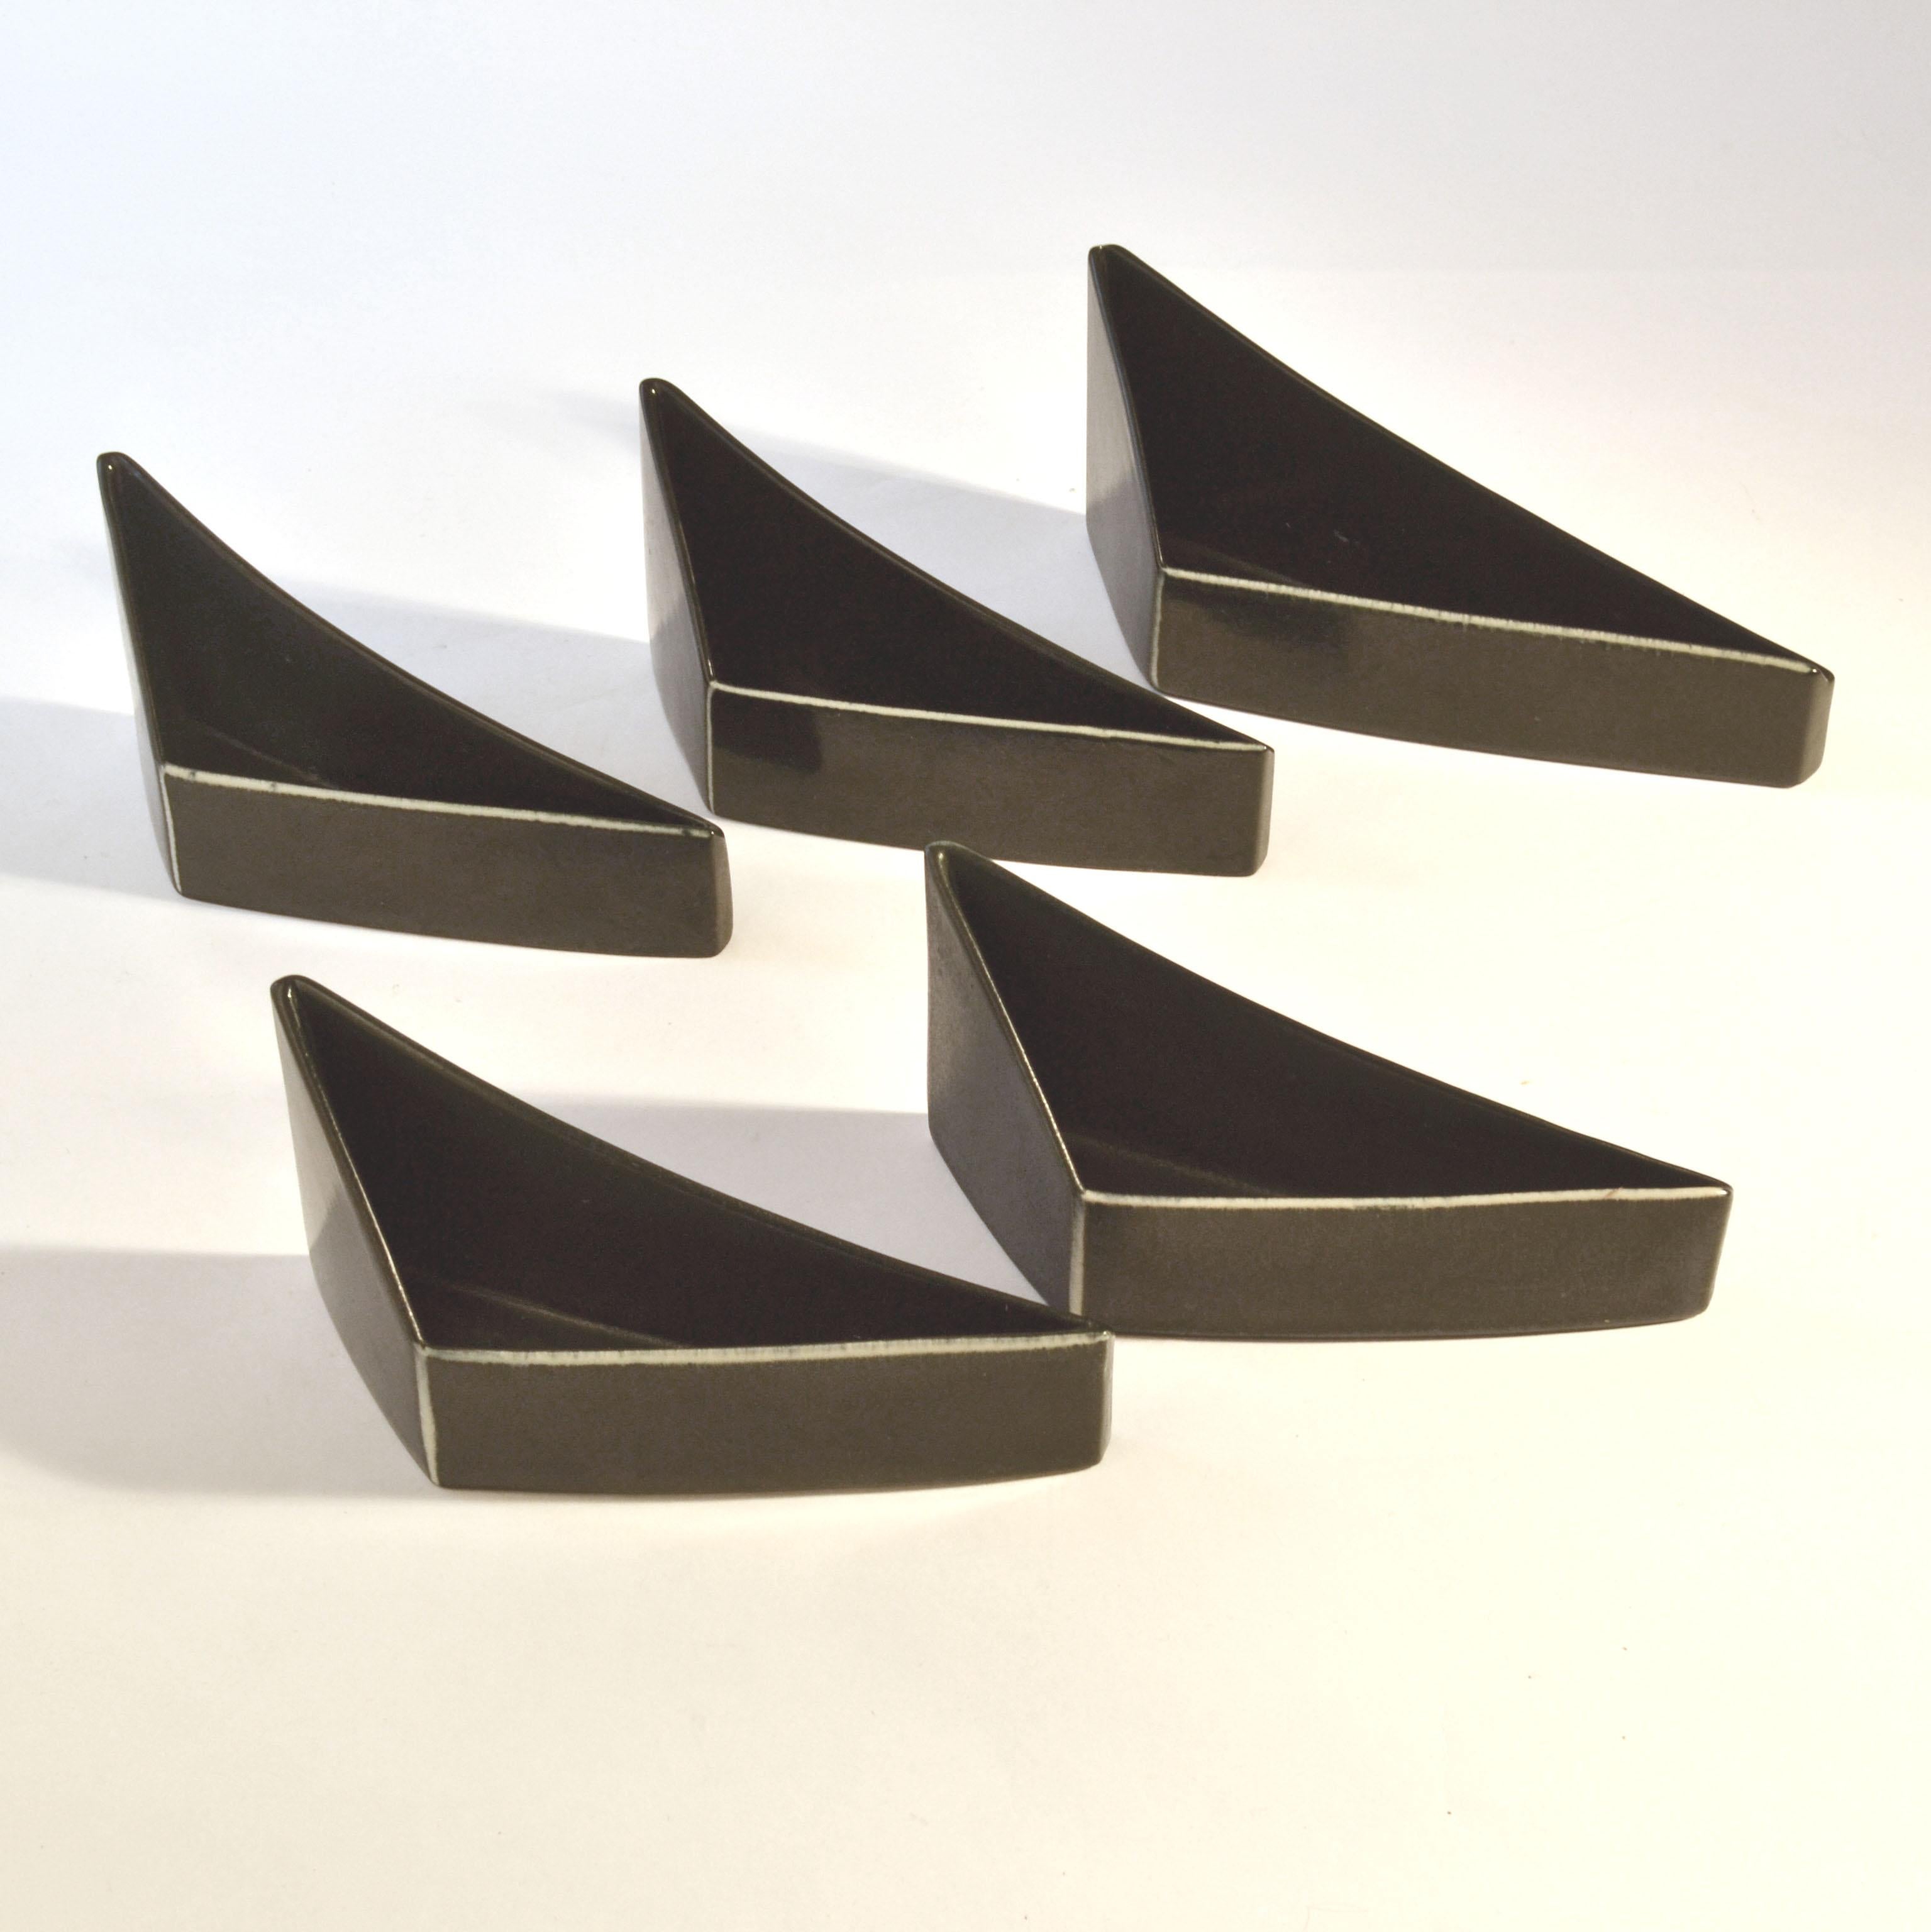 Minimalist Triangular Black and White Ceramic Bowls and Vases In Excellent Condition For Sale In London, GB